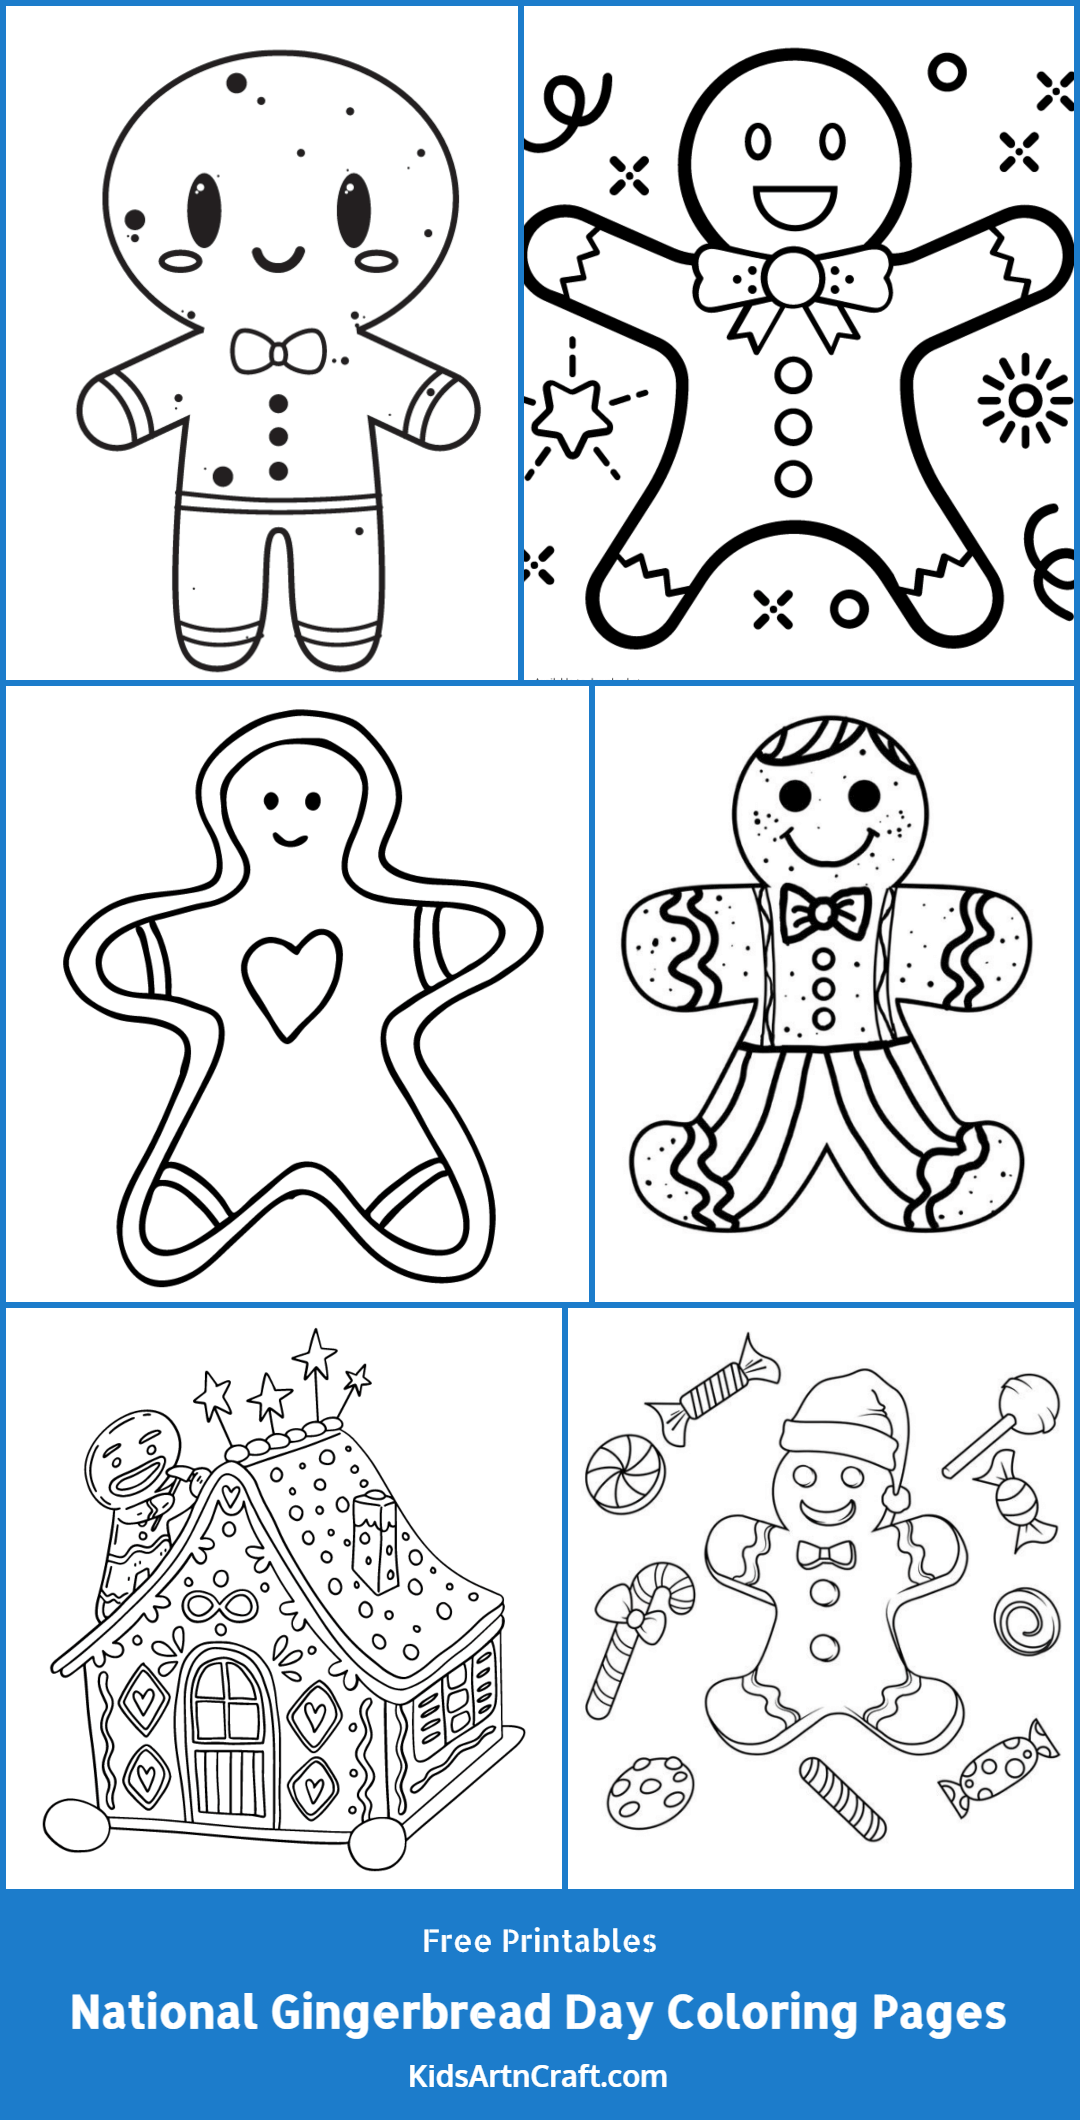 National Gingerbread Day Coloring Pages For Kids-Free Printables